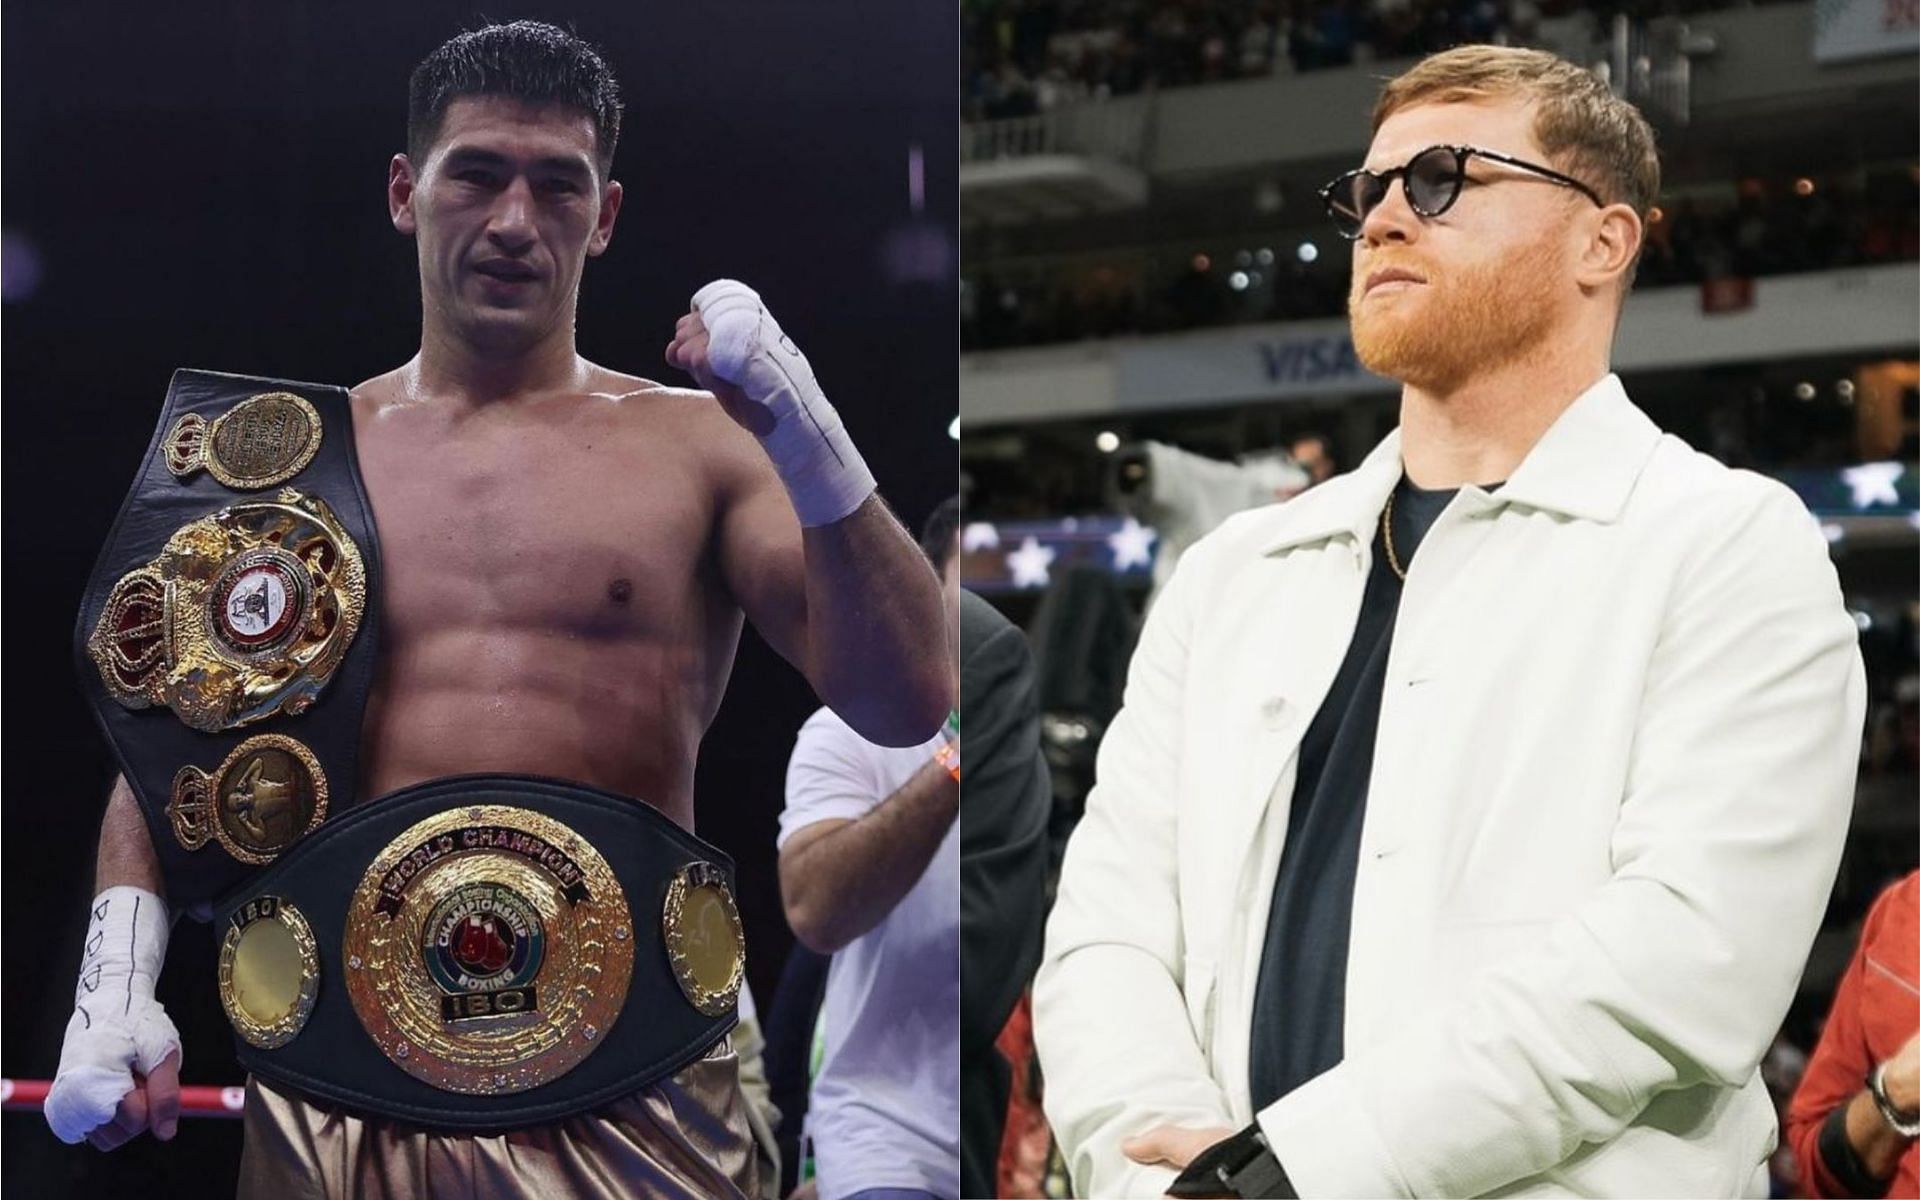 Dmitry Bivol with his belts (left) and Canelo Alvarez (right) (Images courtesy @bivol_d and @canelo on Instagram)